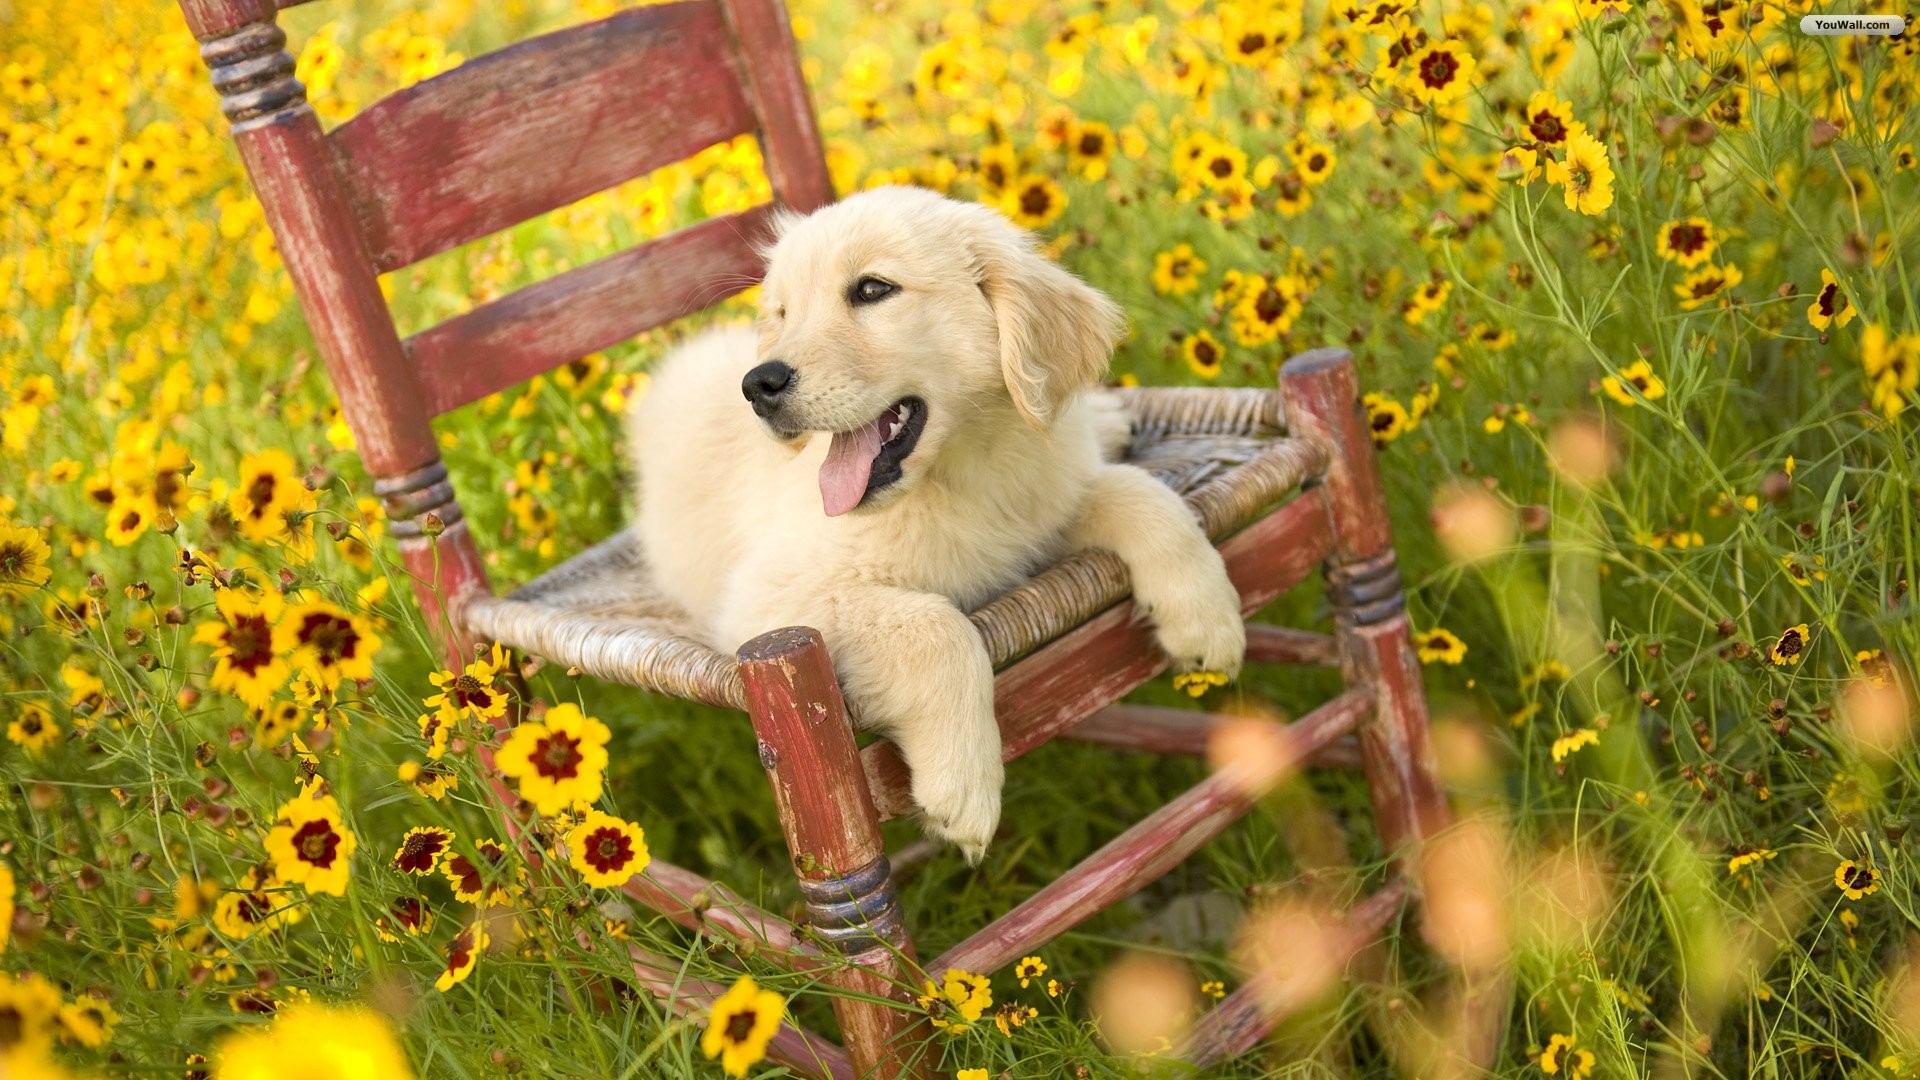 1920x1080 Dog and Yellow Flowers Wallpaper